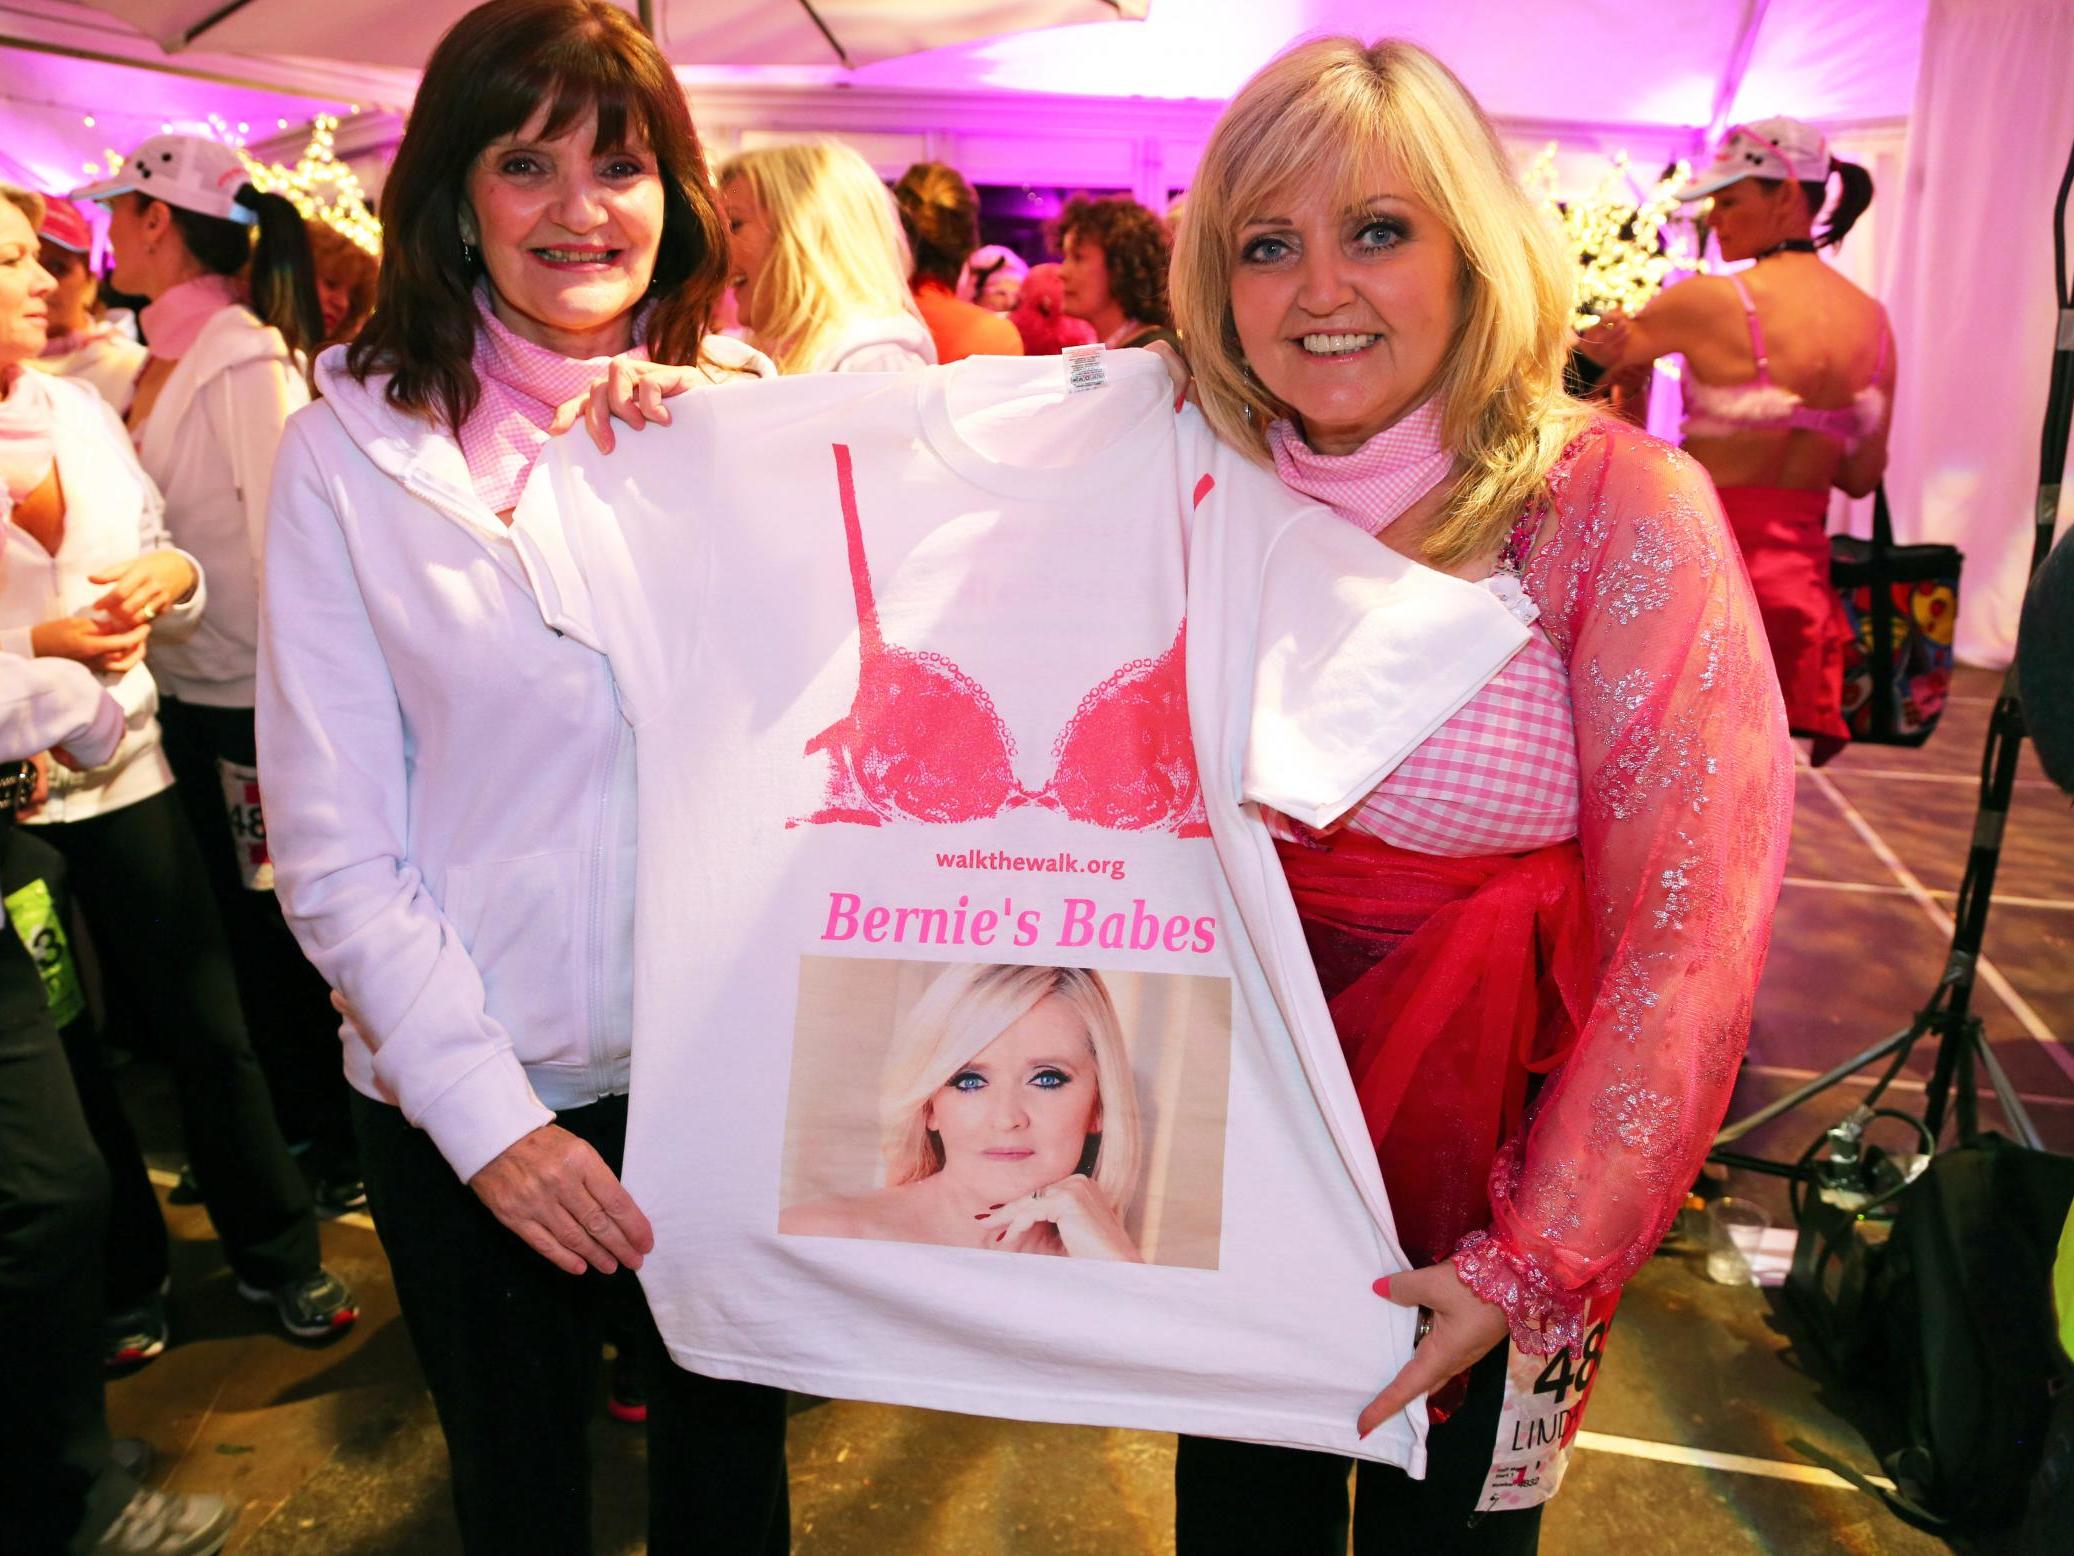 The sisters attend the Walk the Walk Moonwalk charity walk in London on 10 May 2014, holding a T-shirt showing their sister Bernie who died of breast cancer in 2013